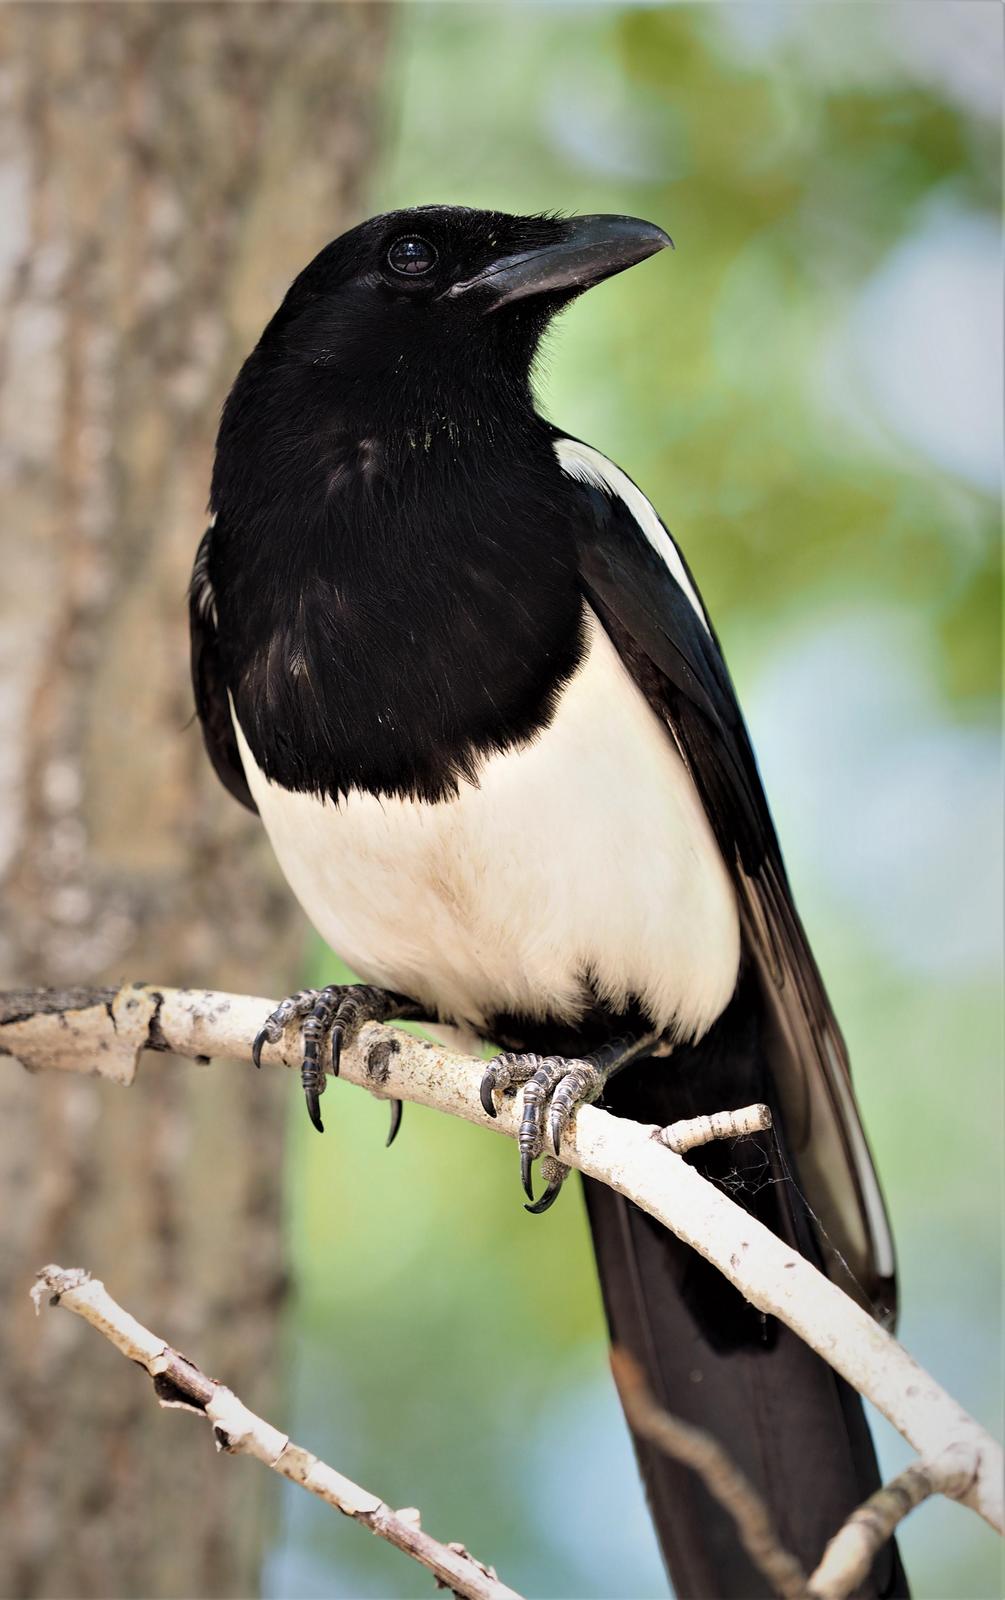 Black-billed Magpie Photo by Colin Hill